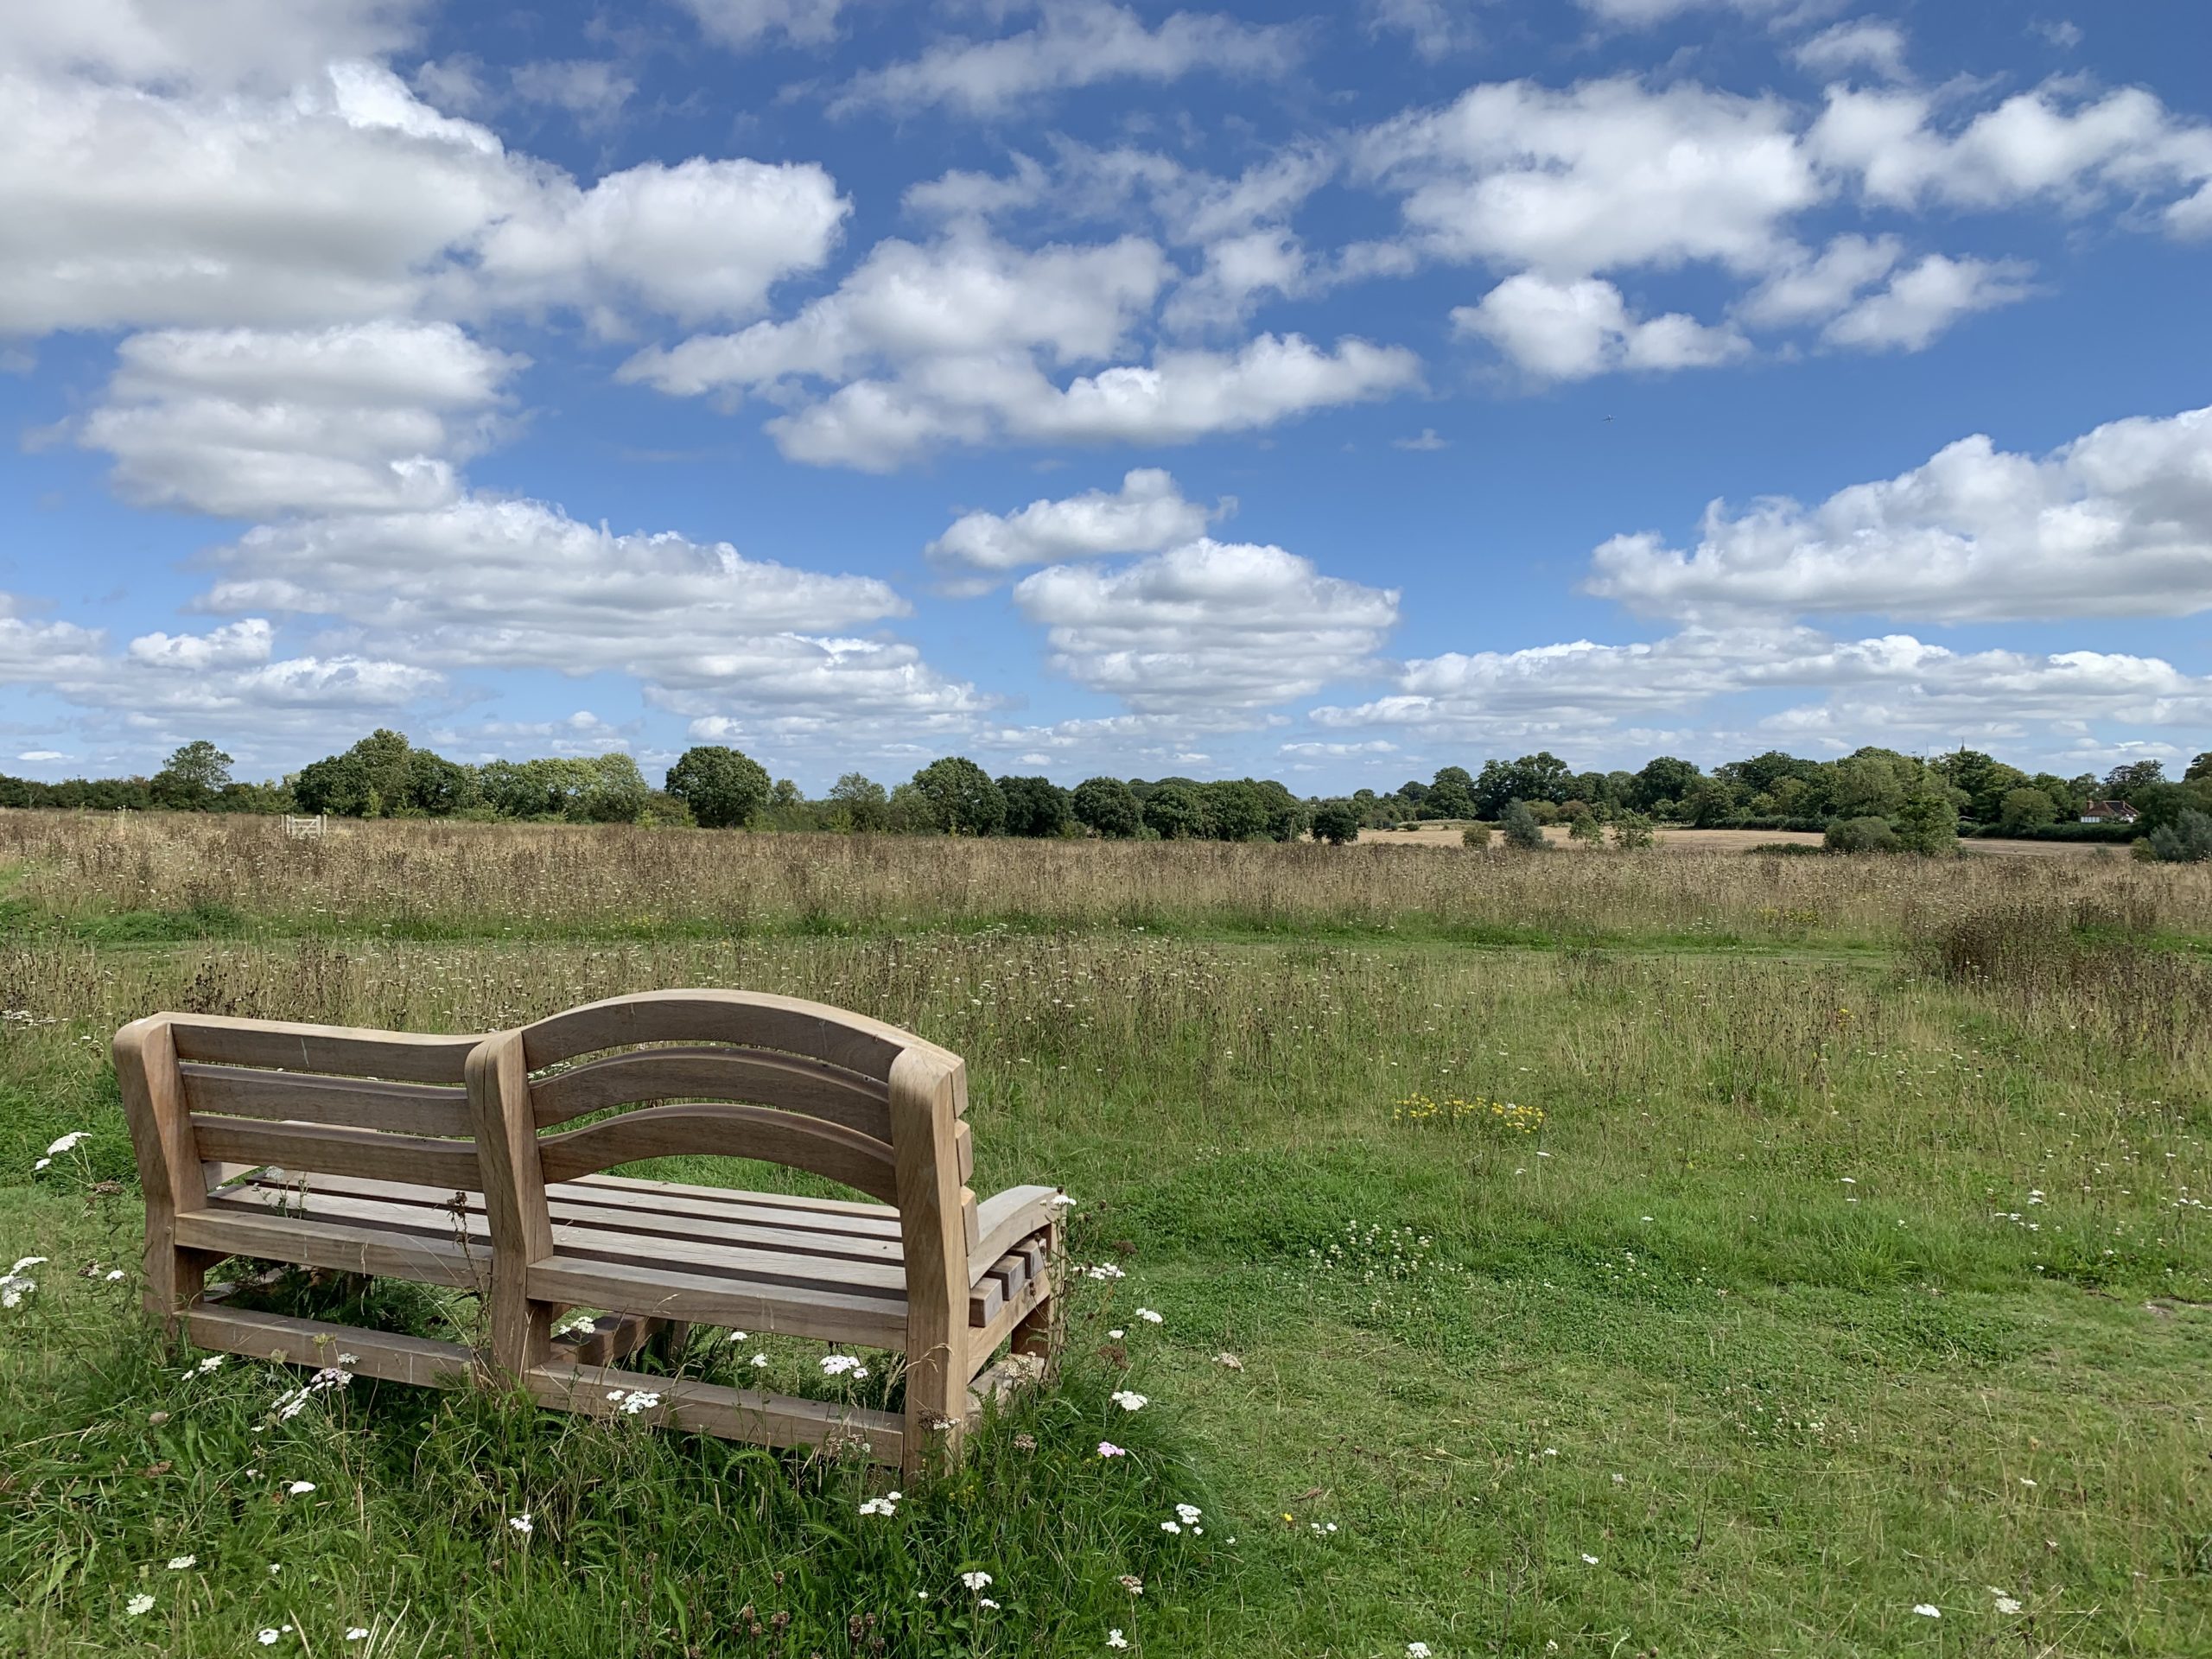 Photo of a new wooden bench looking out across a meadow. Blue sky with fluffy white clouds.